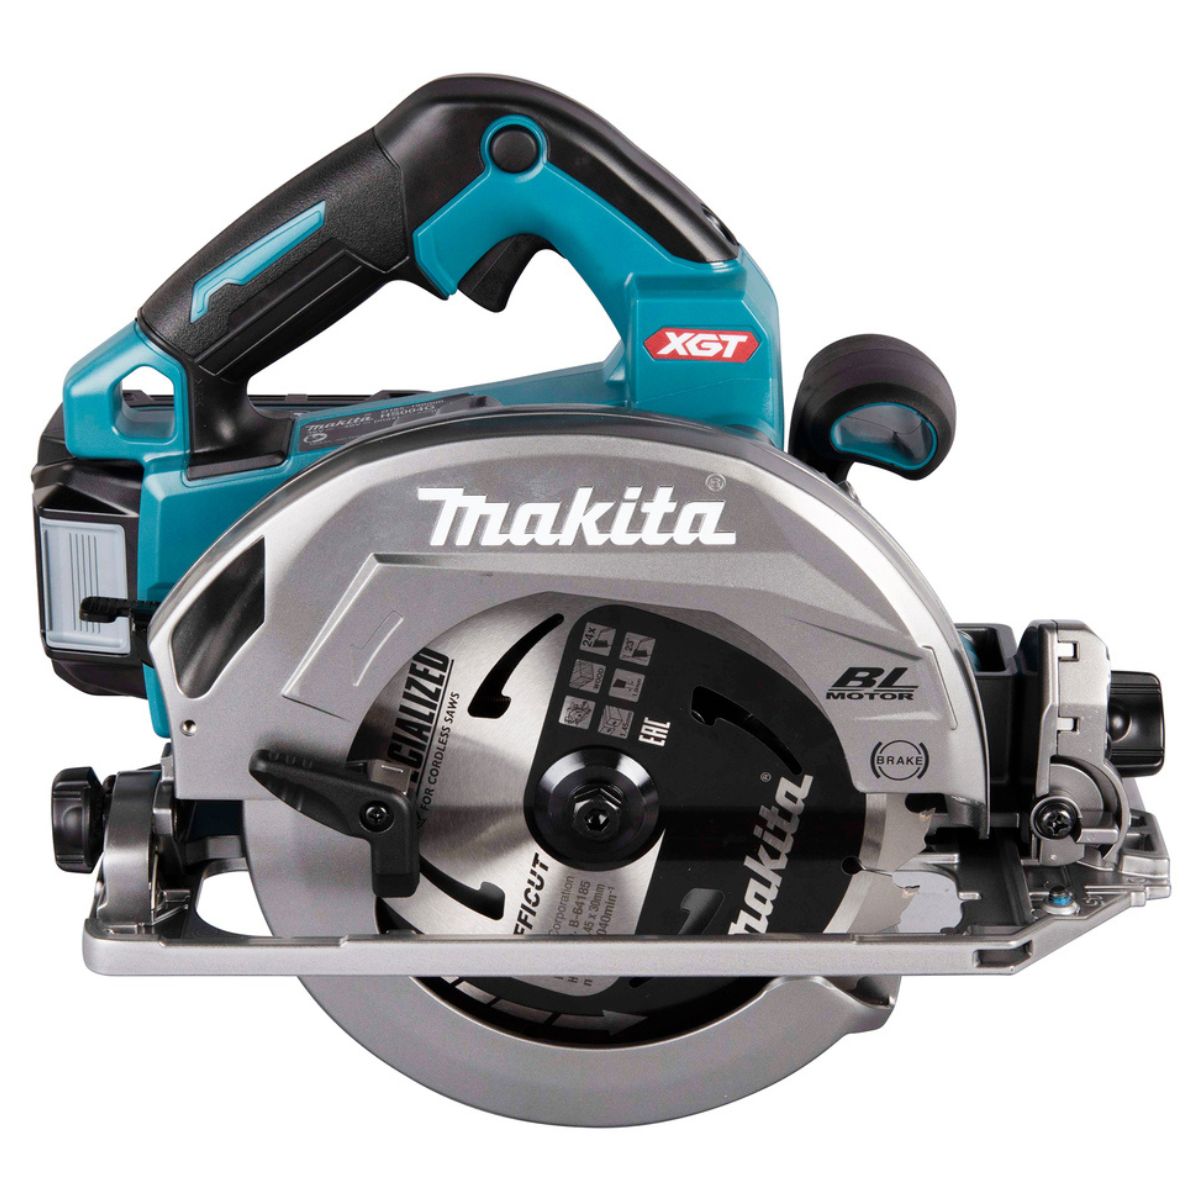 Makita HS004GZ02 40V Max XGT Brushless 190mm Circular Saw Body Only with Case